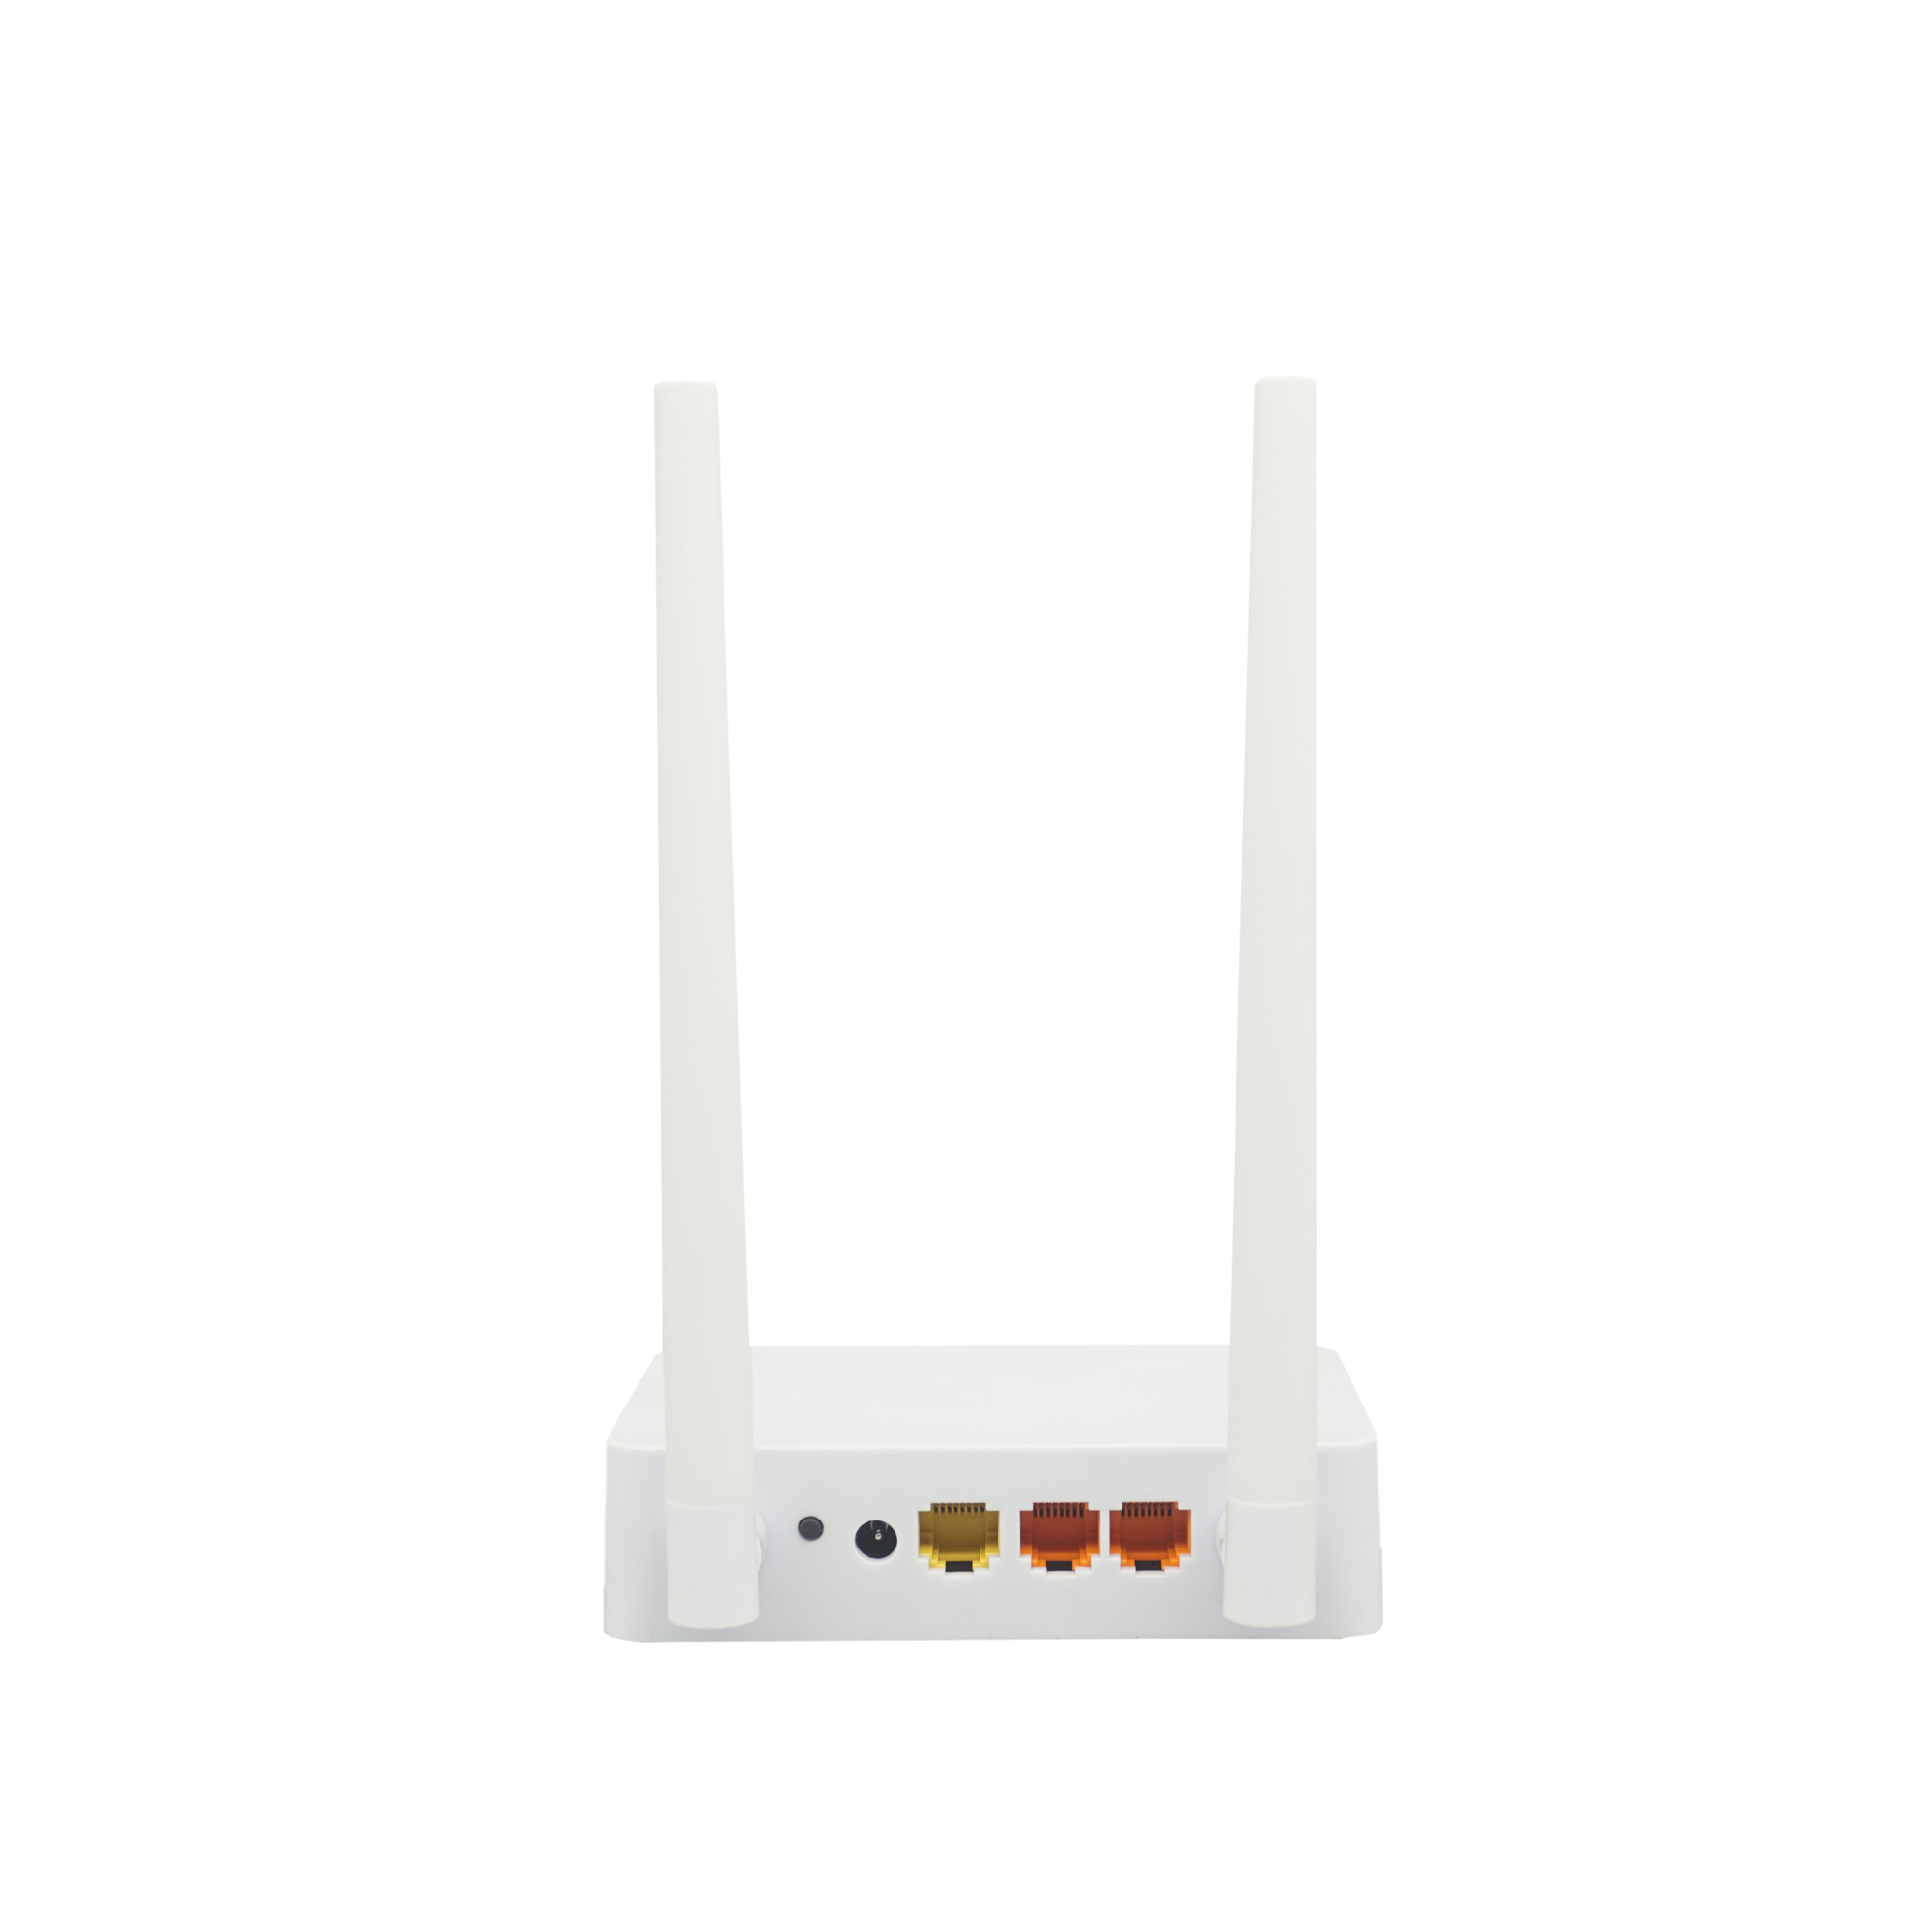 2.4GHz 300Mbps Wireless Router